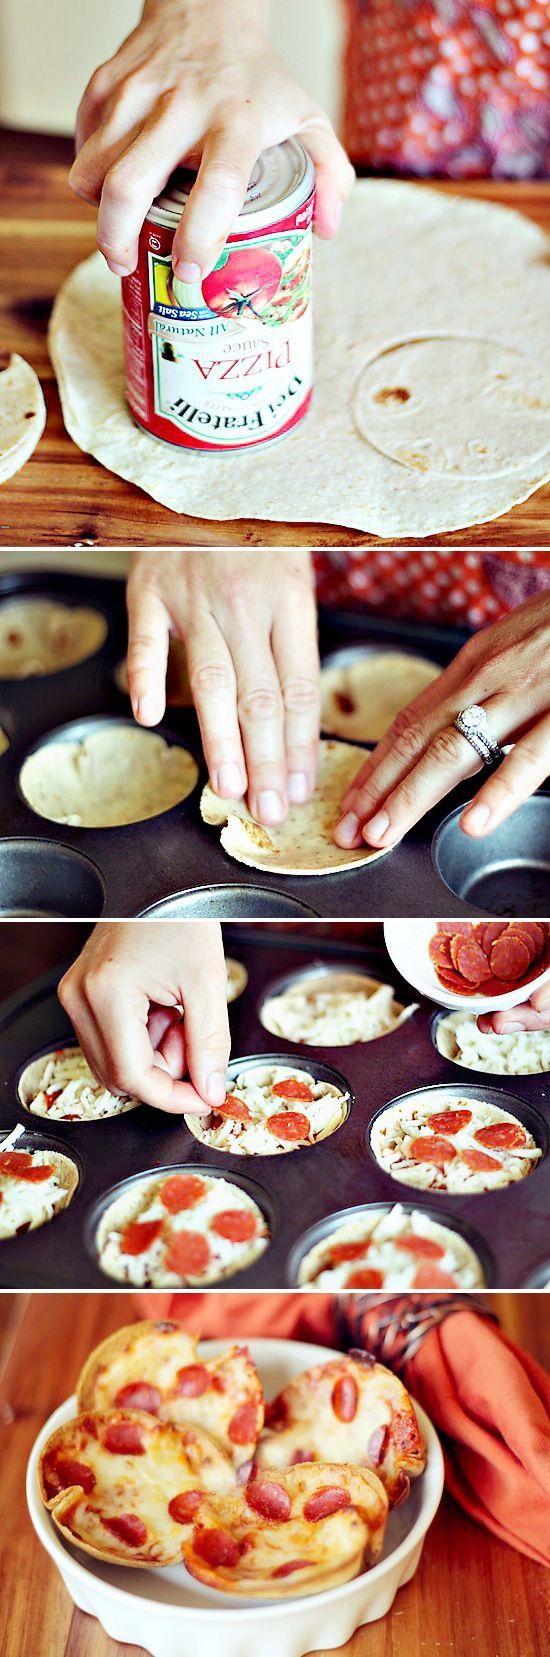 Mini-Tortilla-Crust-Pizzas These are so easy to do and they turn our great!! Brought them to a family function and had to keep